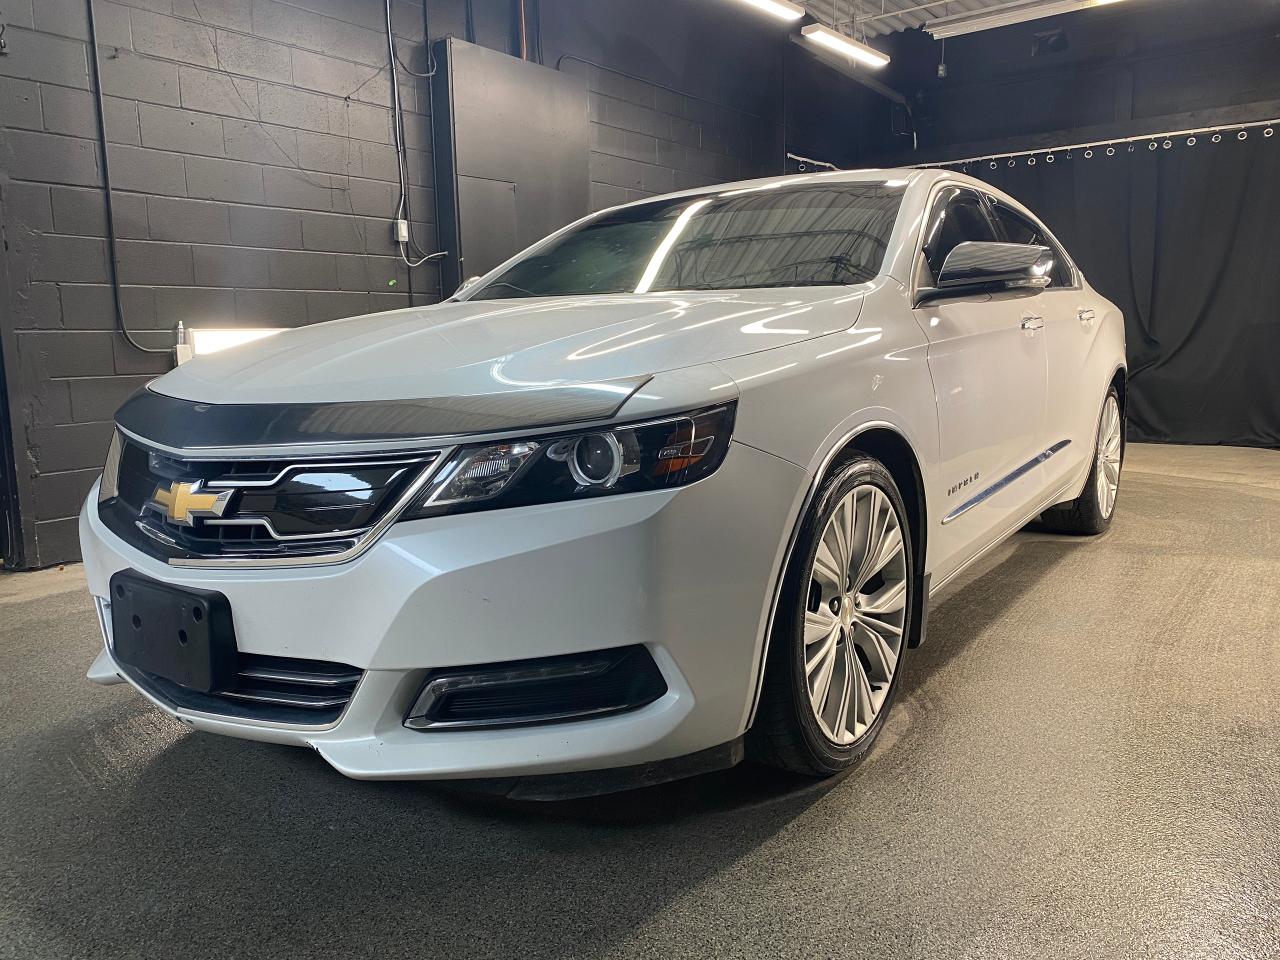 2018 Chevrolet Impala Premier / Clean CarFax / Leather / Loaded! - Photo #1